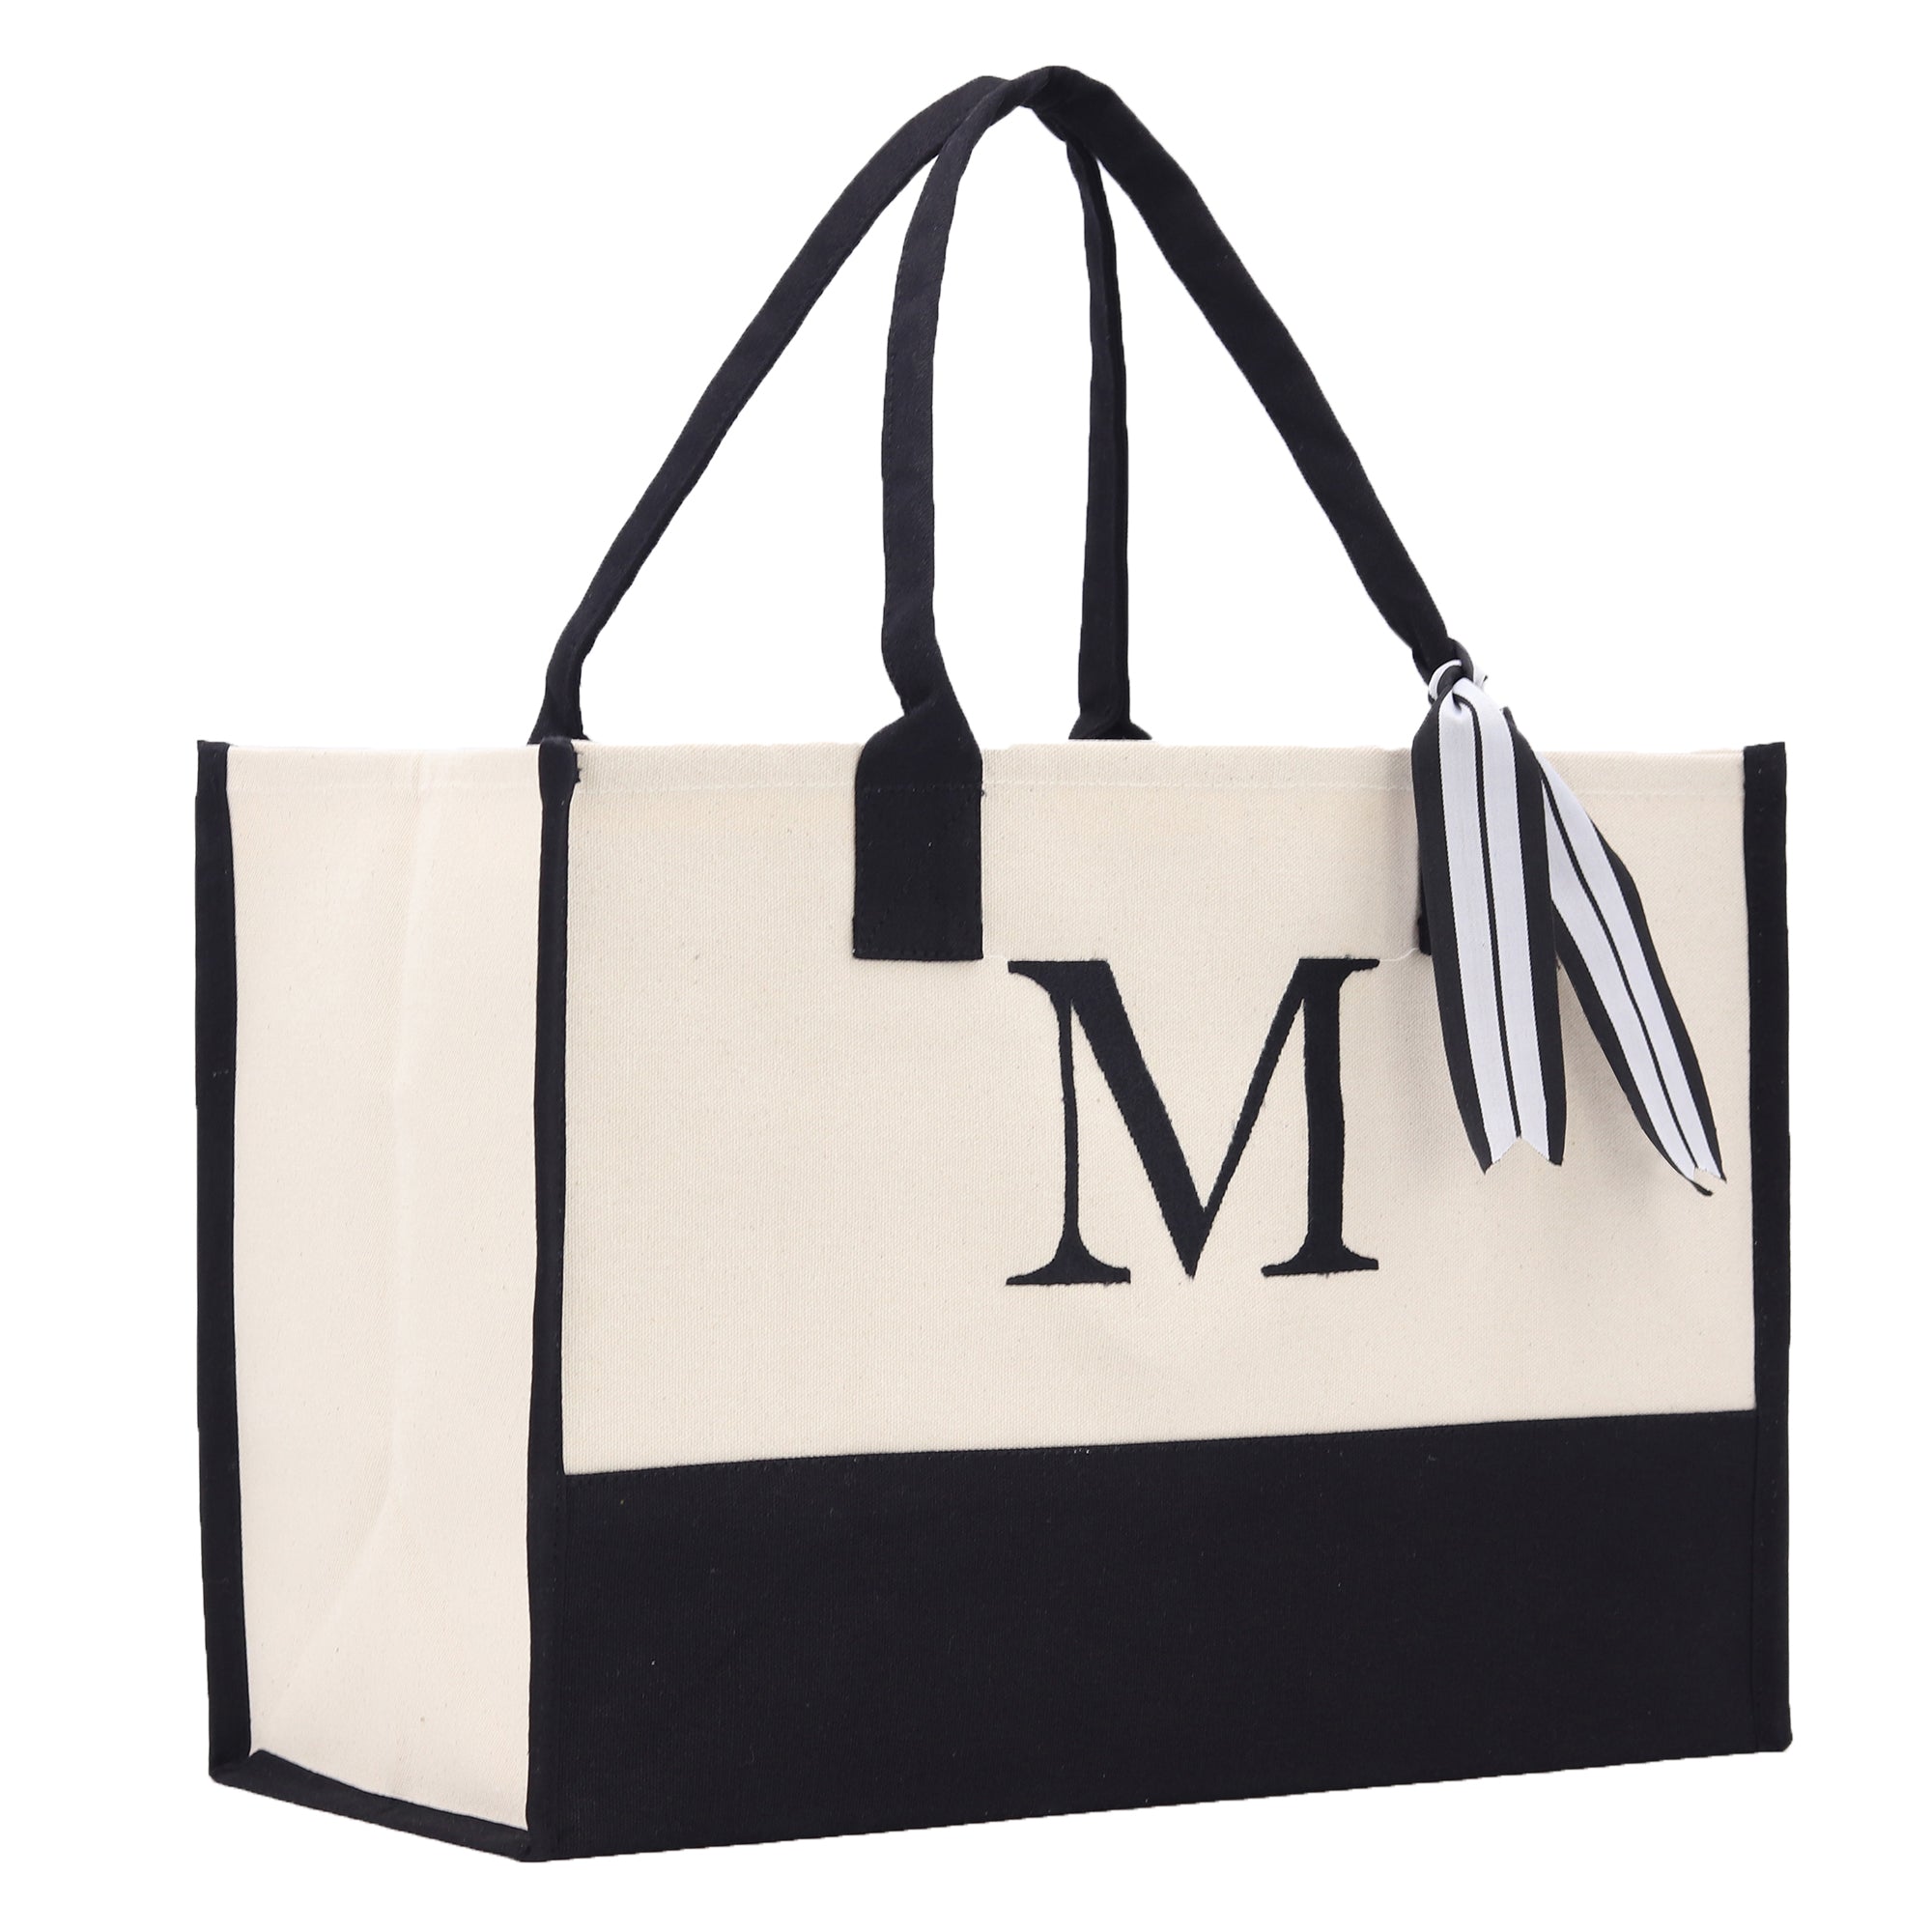 Monogram Tote Bag with 100% Cotton Canvas and a Chic Personalized Monogram (Black - Block Font)